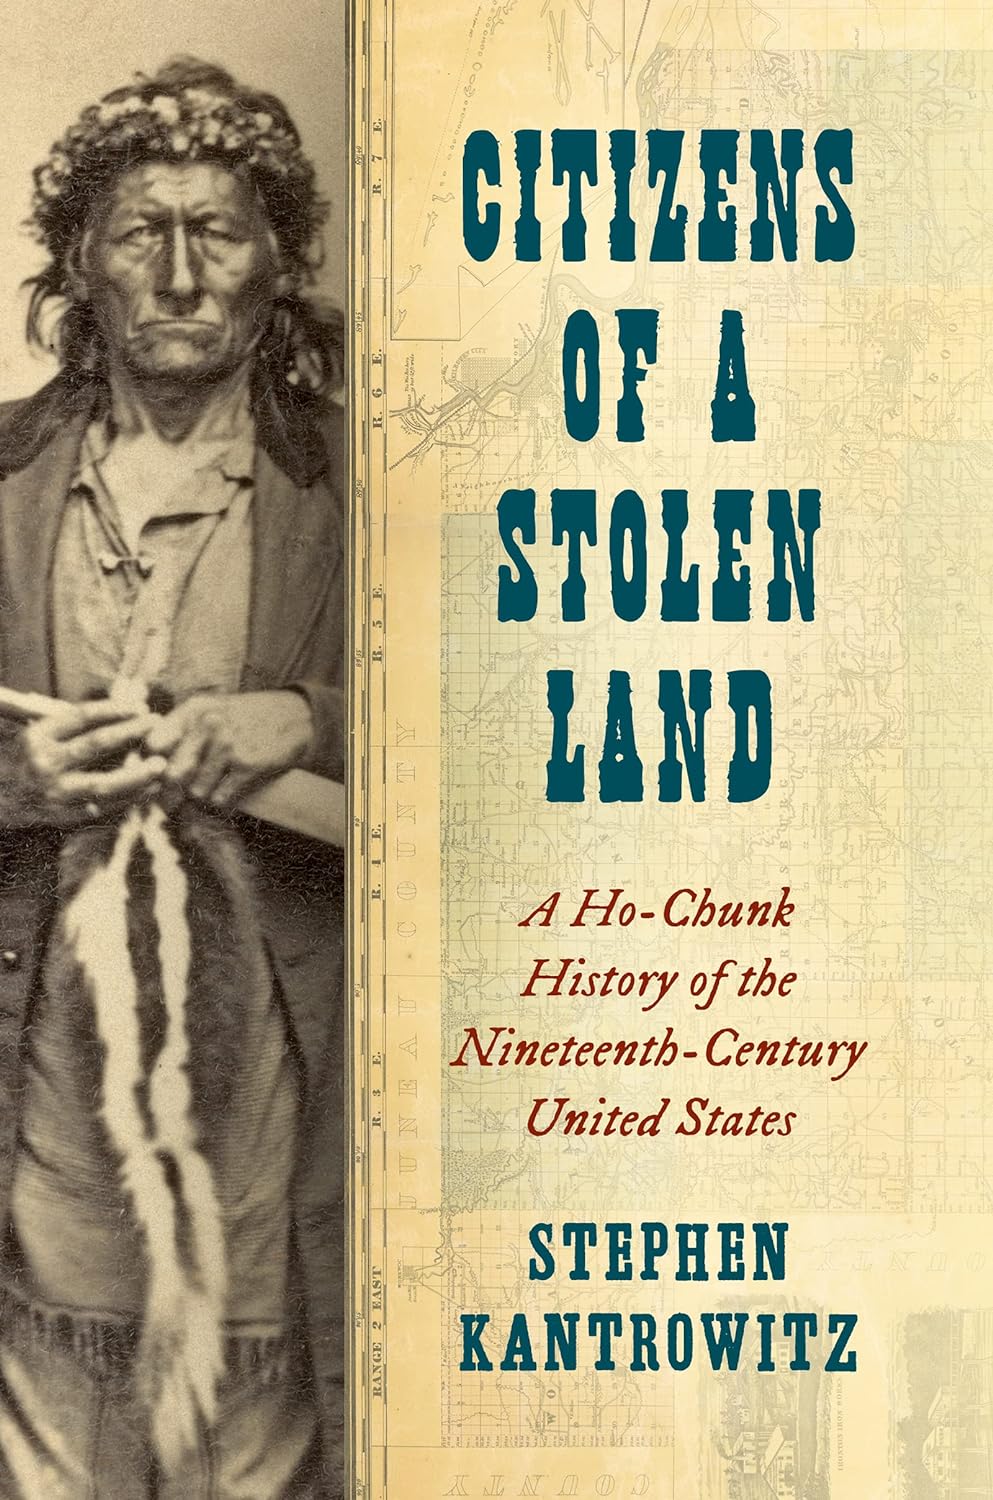 Citizens of a Stolen Land: A Ho-Chunk History of the Nineteenth-Century United States by Stephen Kantrowitz